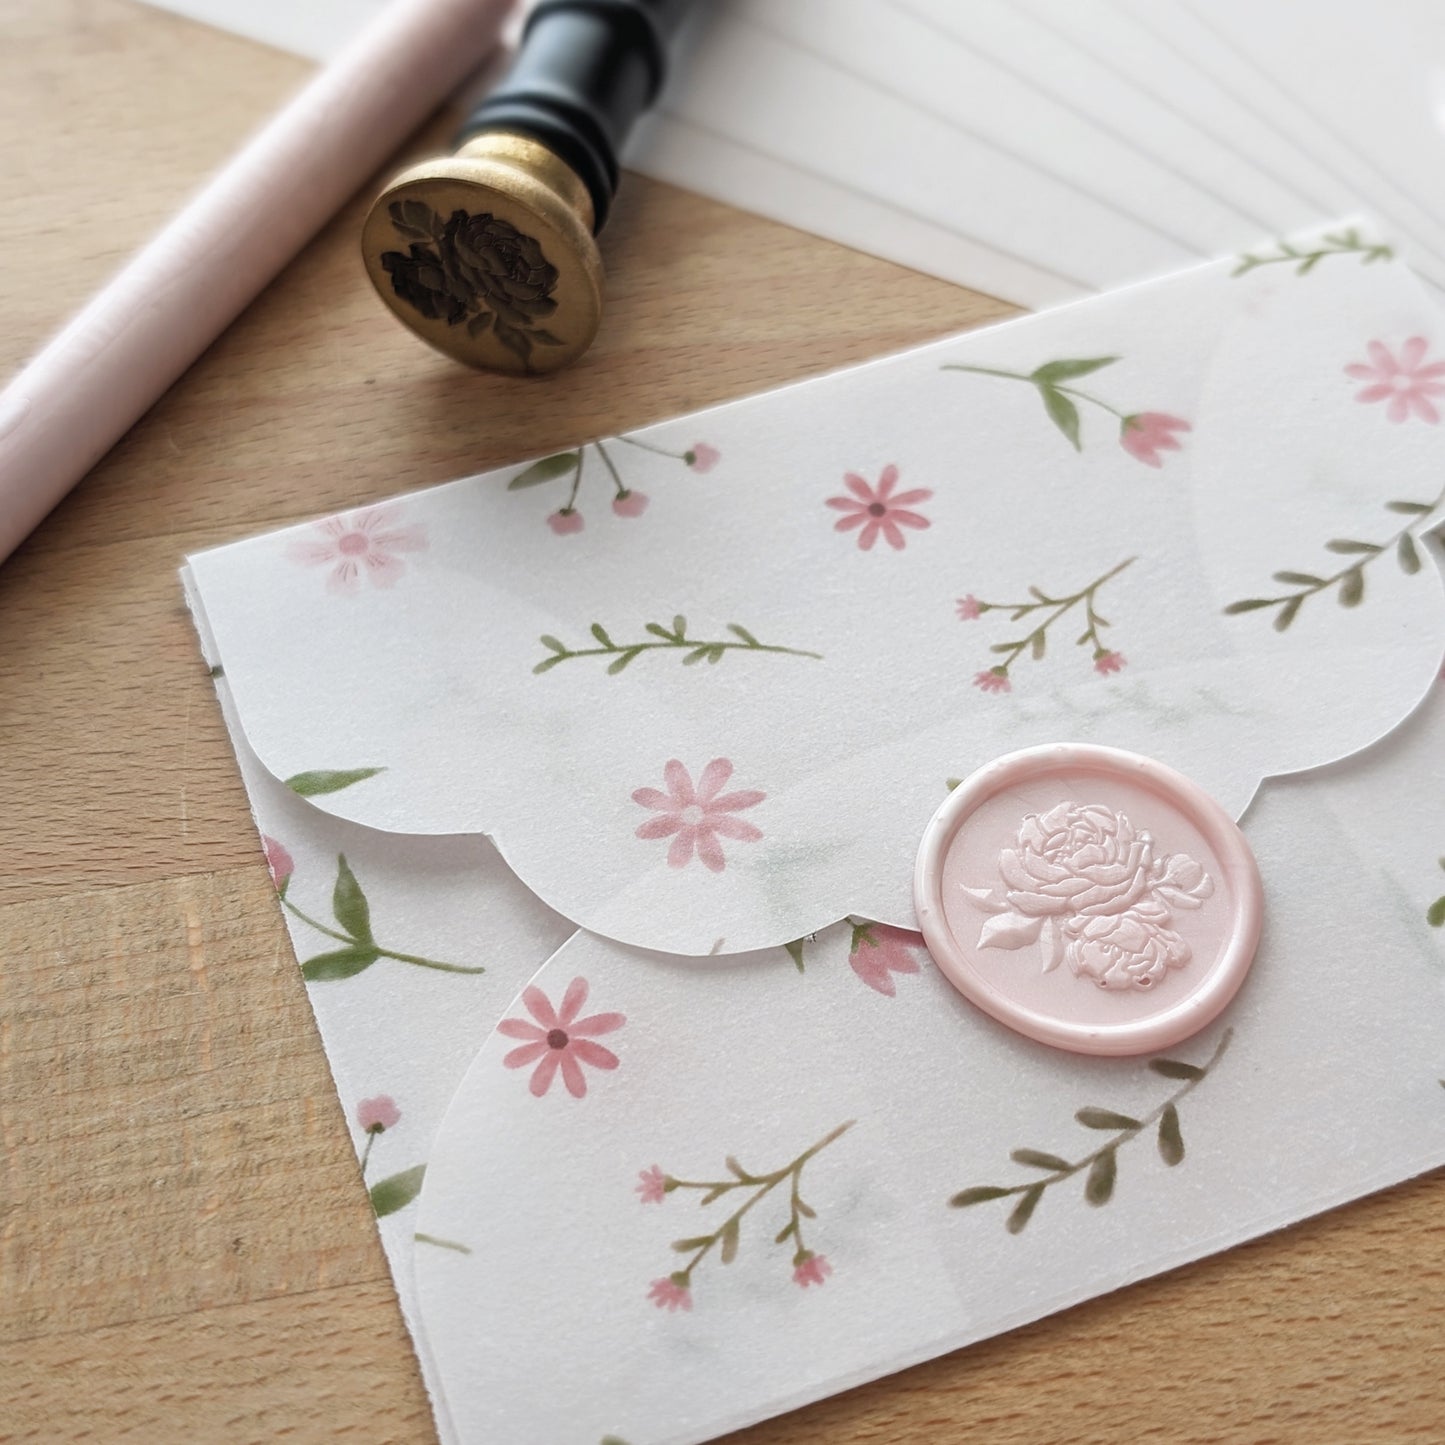 Cute Pink Florals - Bar Scallop Envelope Instant Download Template